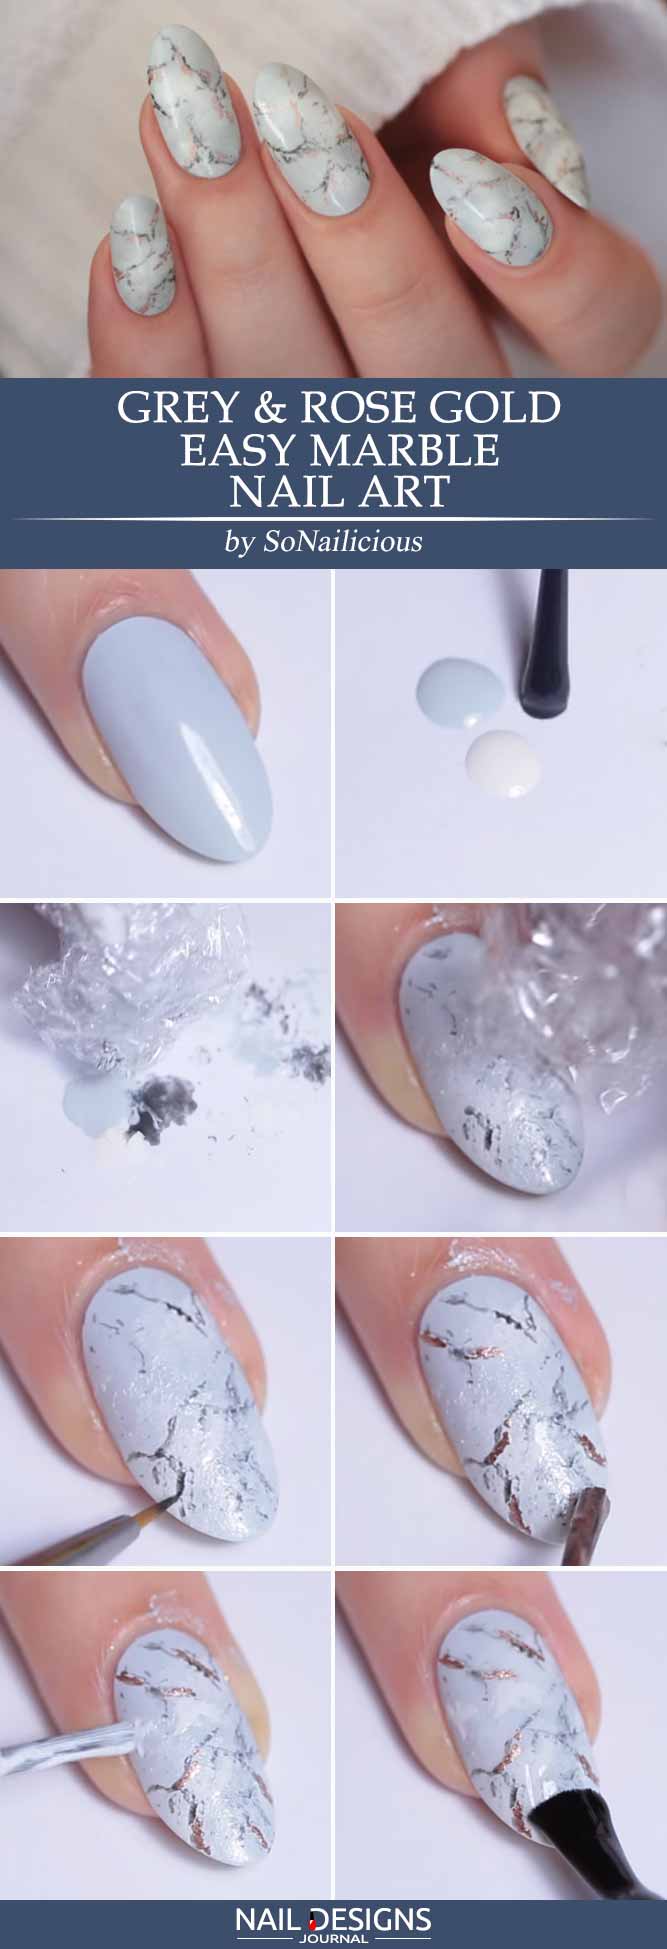 Cute Manicure with Easy Marble Designs picture 1